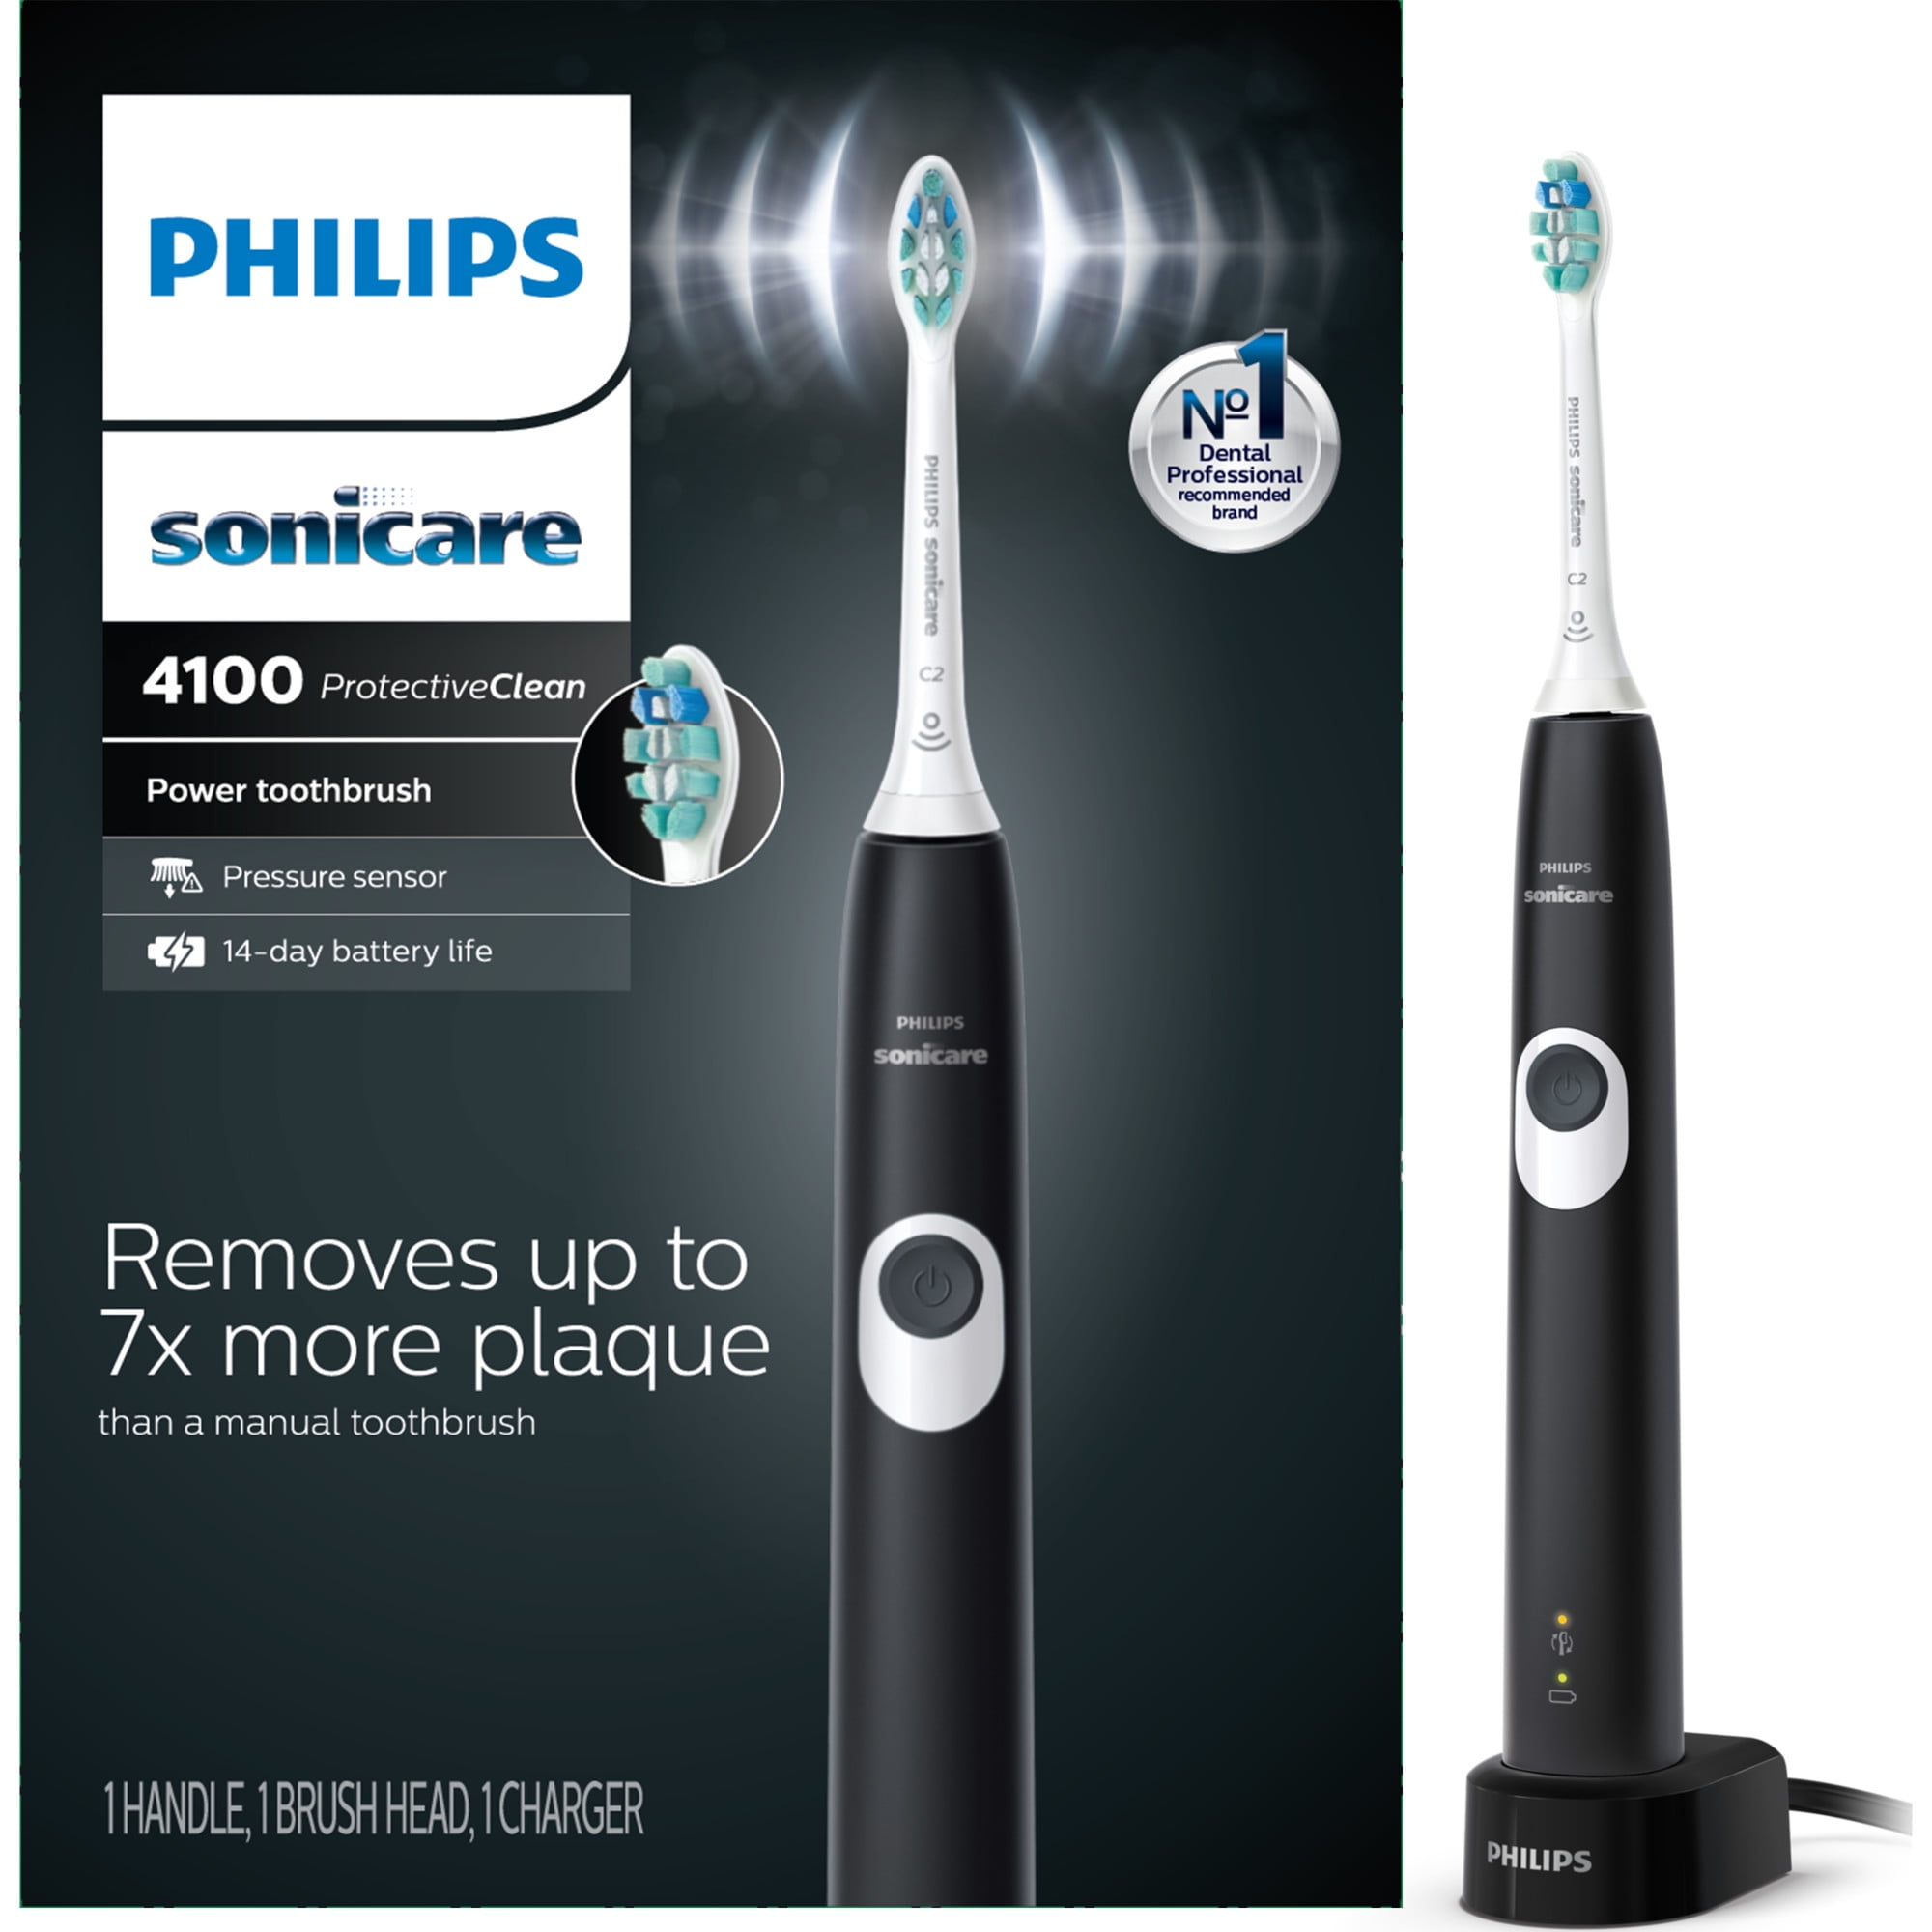 Philips sonicare protectiveclean 4100 plaque control